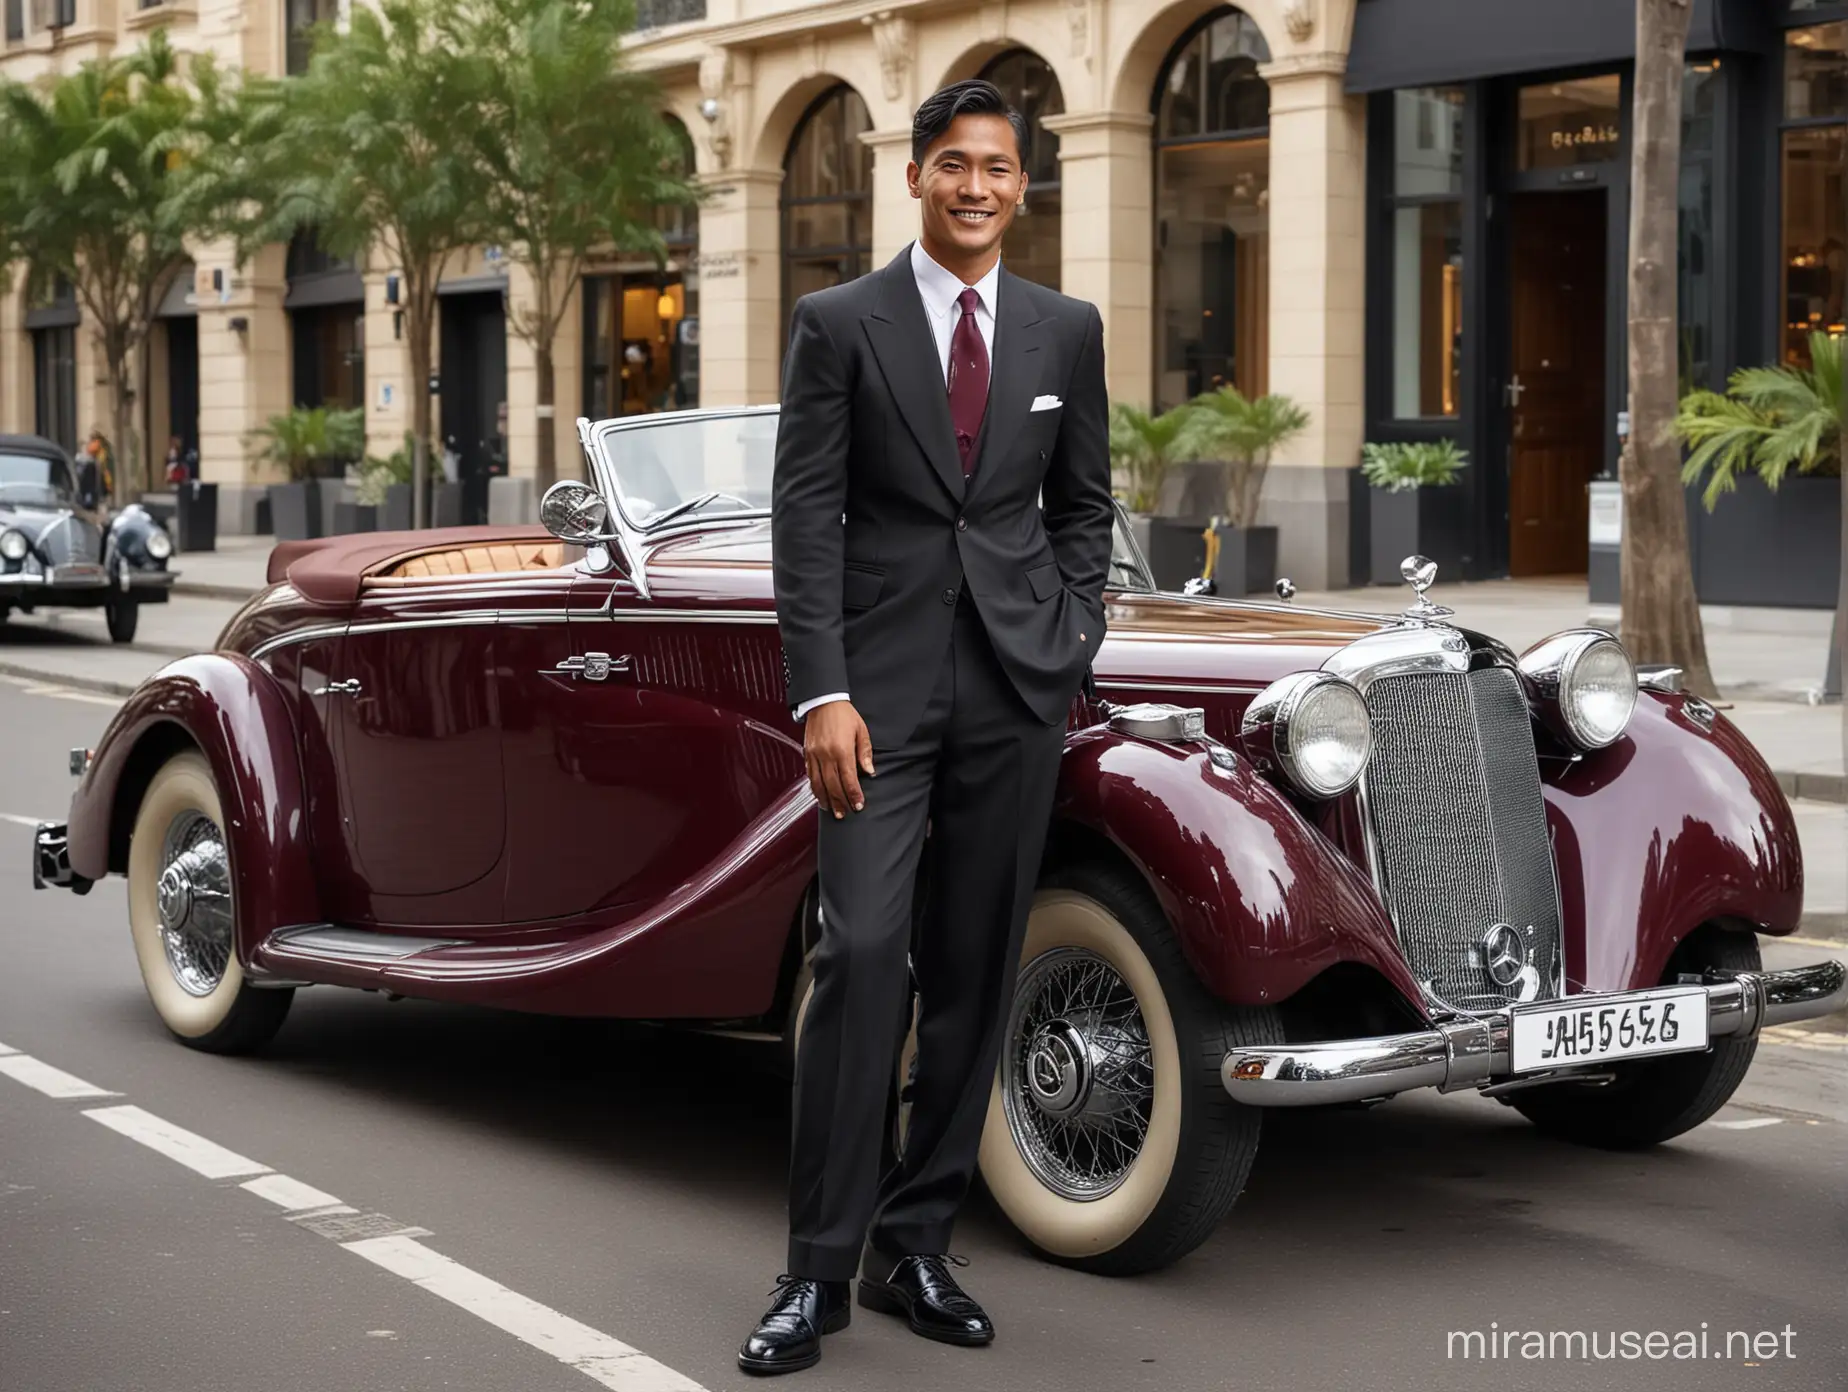 fotografi Indonesian man next to the door of a fashionable Mercedes-Benz 540K Special Roadster 1936 car, wide smiling face, oval face, black suit with tie, black, fantofel shoes, maroon chameleon car model adds a dominant cool mystery with a very fashionable metal texture, background of daytime city park street day, ultra high quality